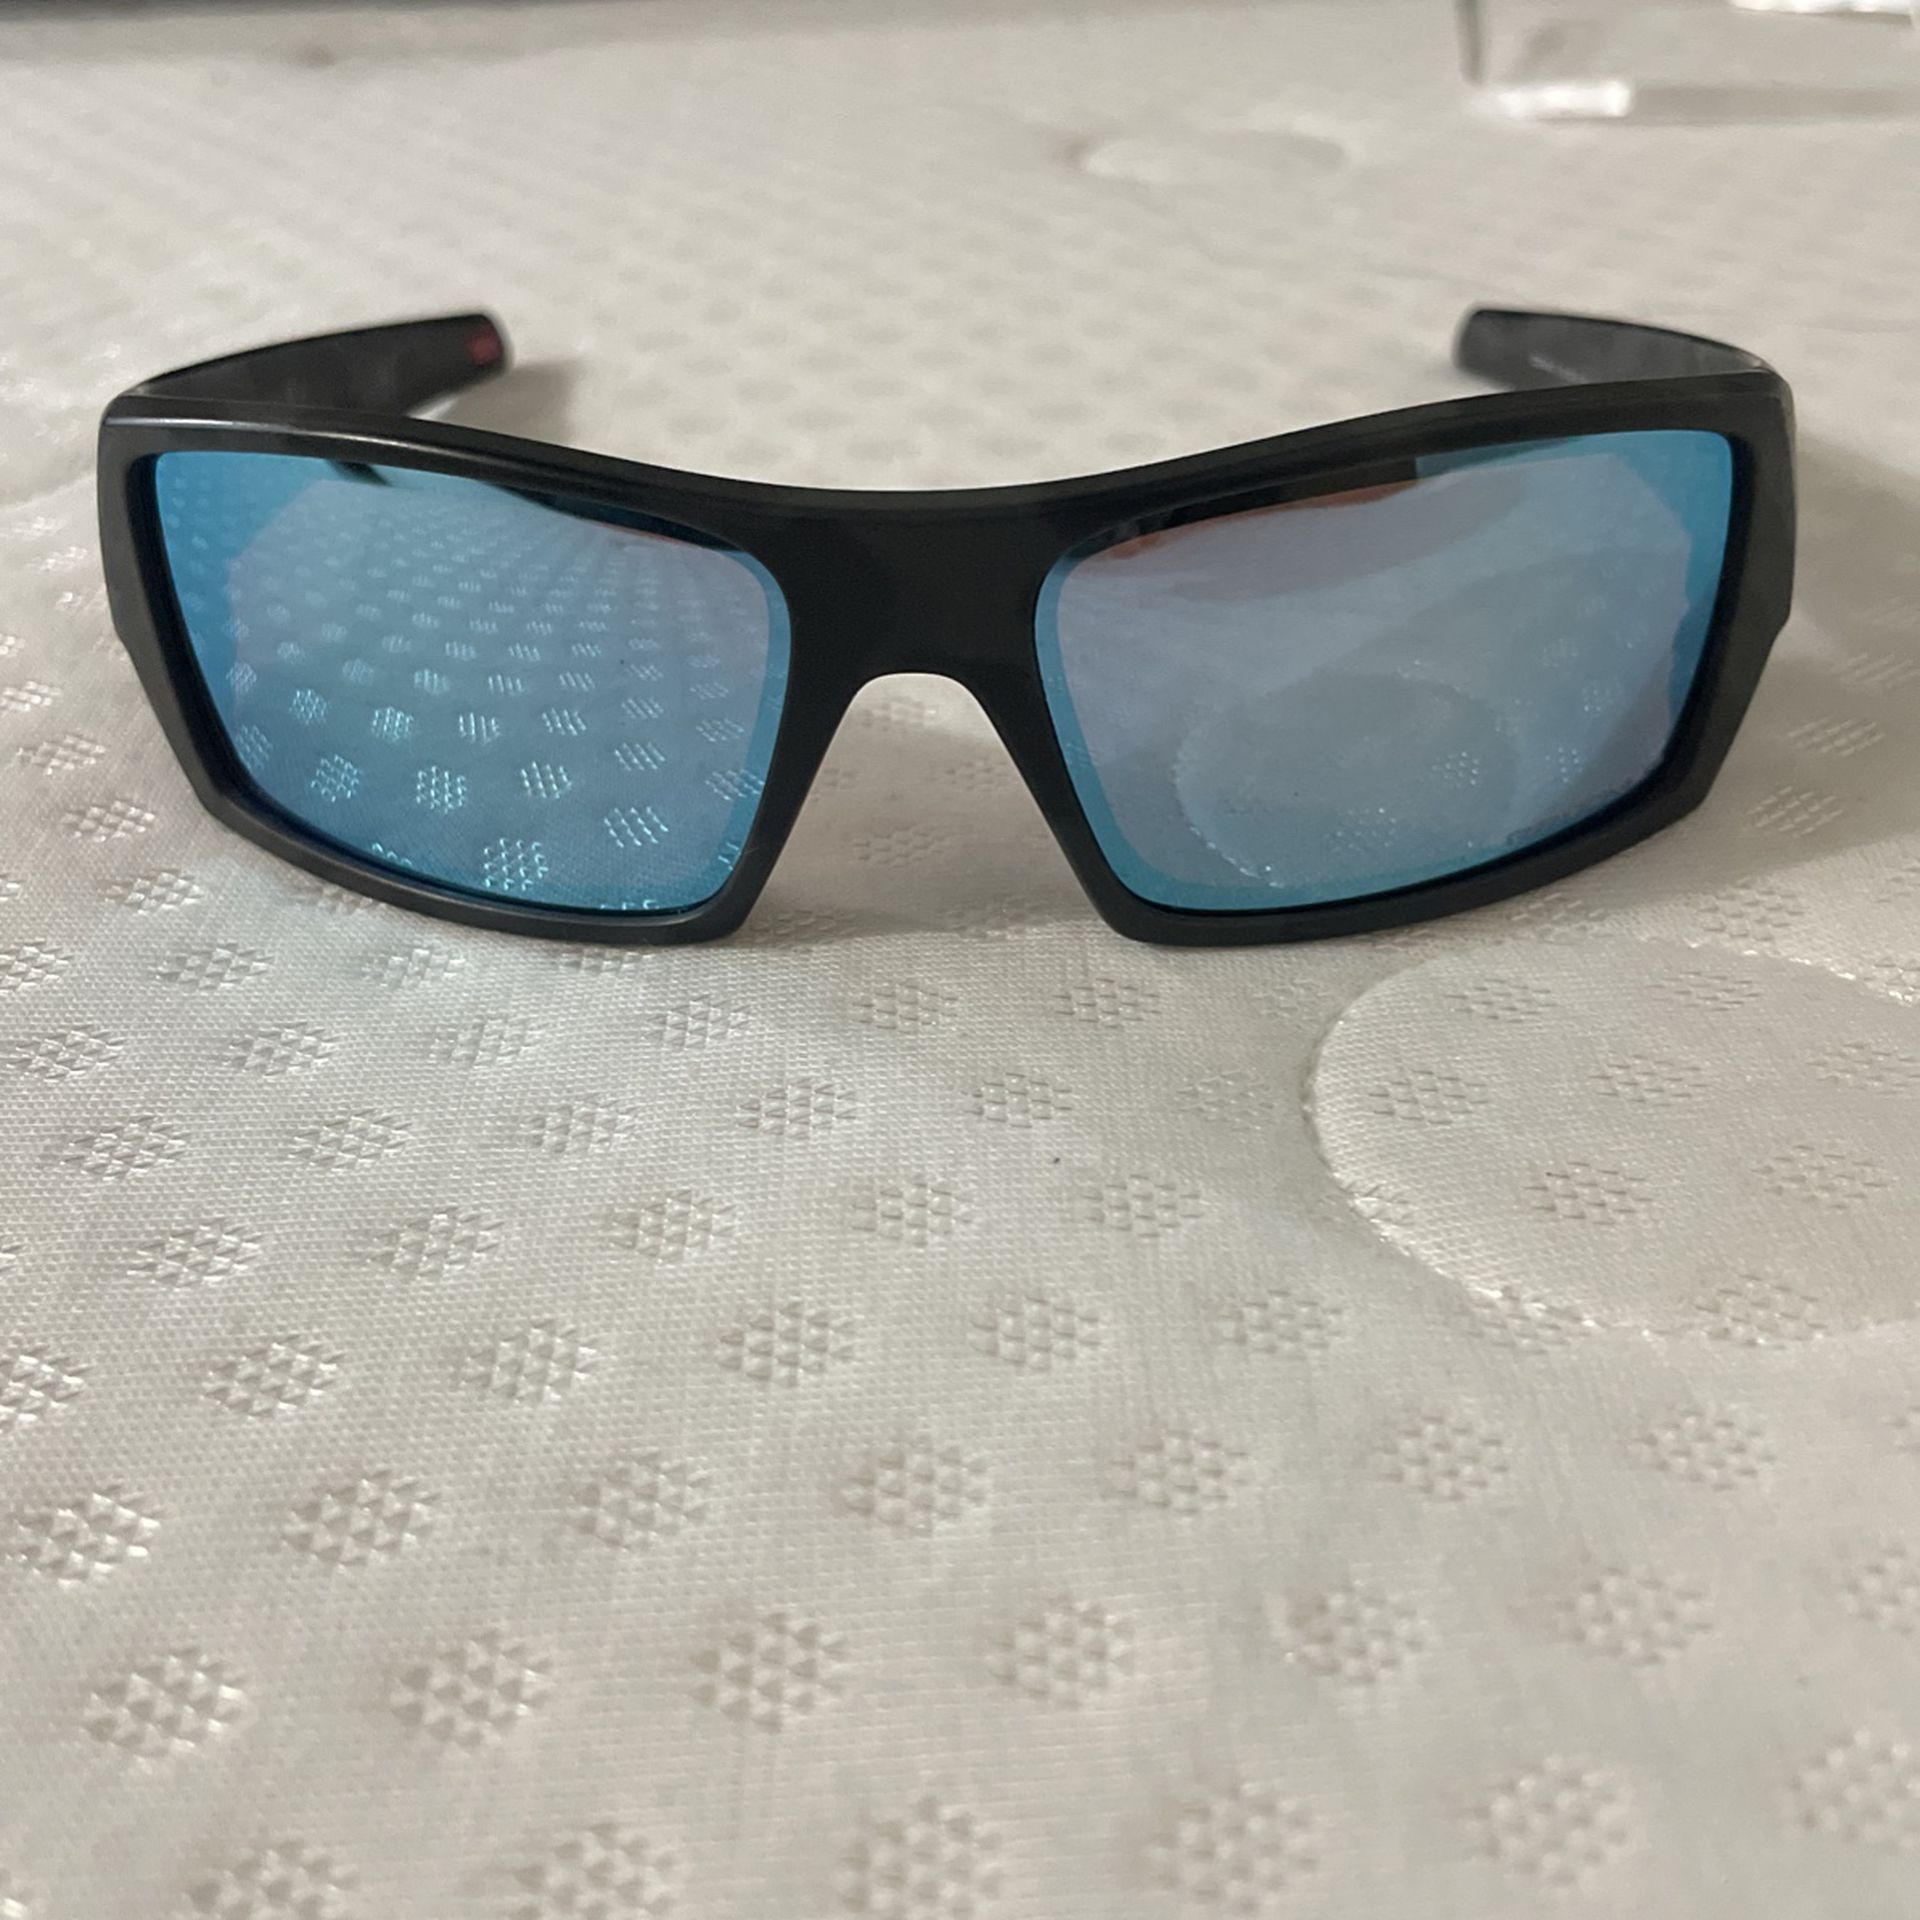 Oakley Gascan Sunglasses for Sale in Chicago, IL - OfferUp